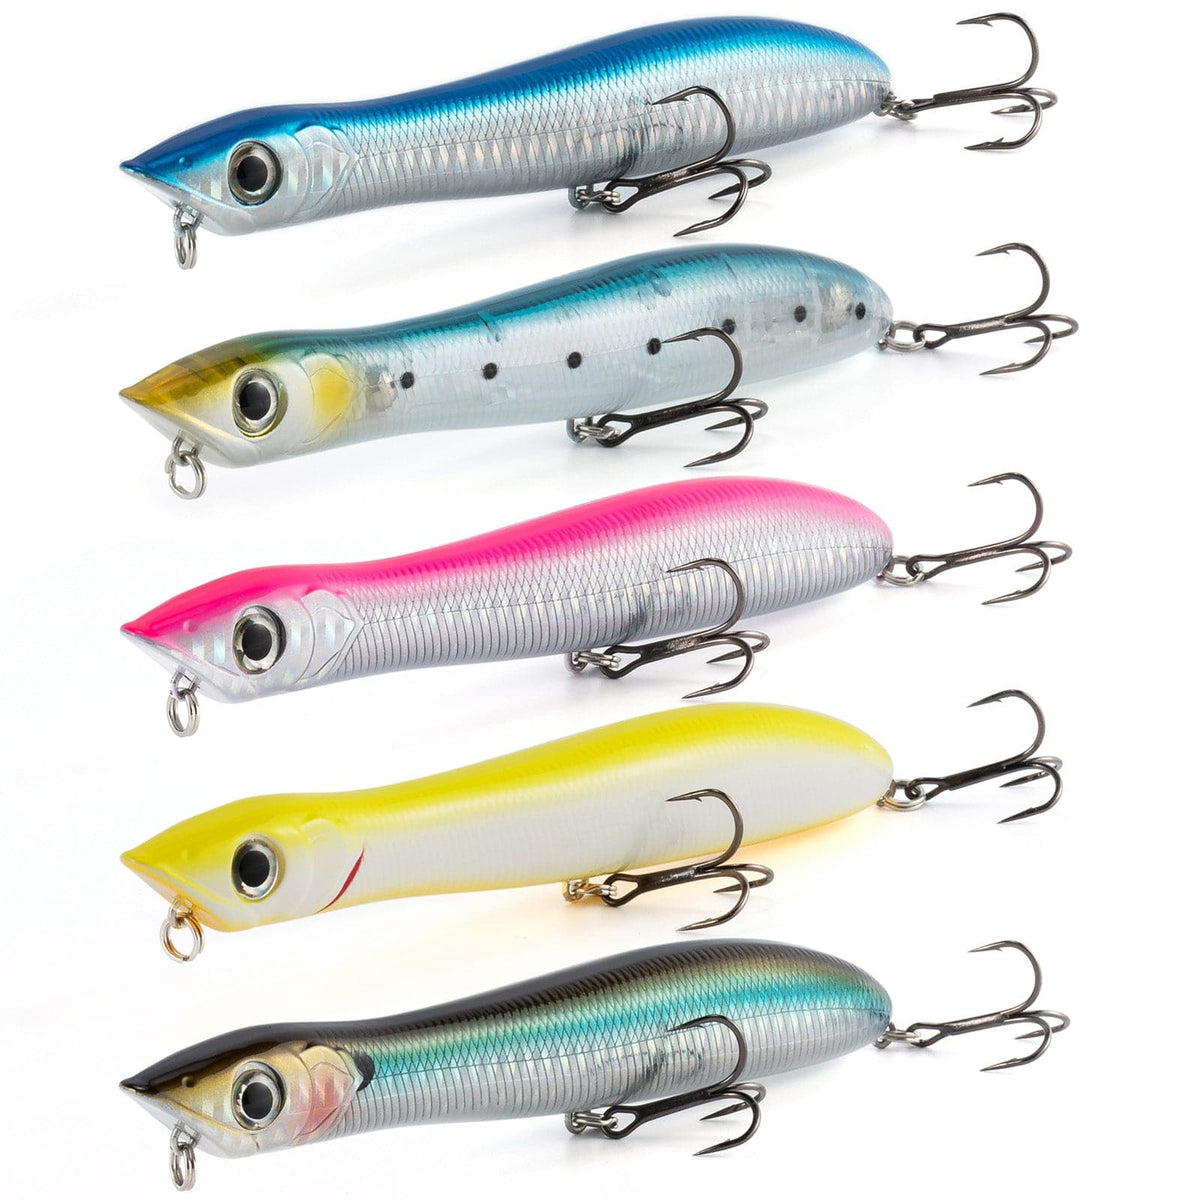 Dr.Fish Topwater Lures Floating Pencil Popper Lure 5.51" 0.9oz